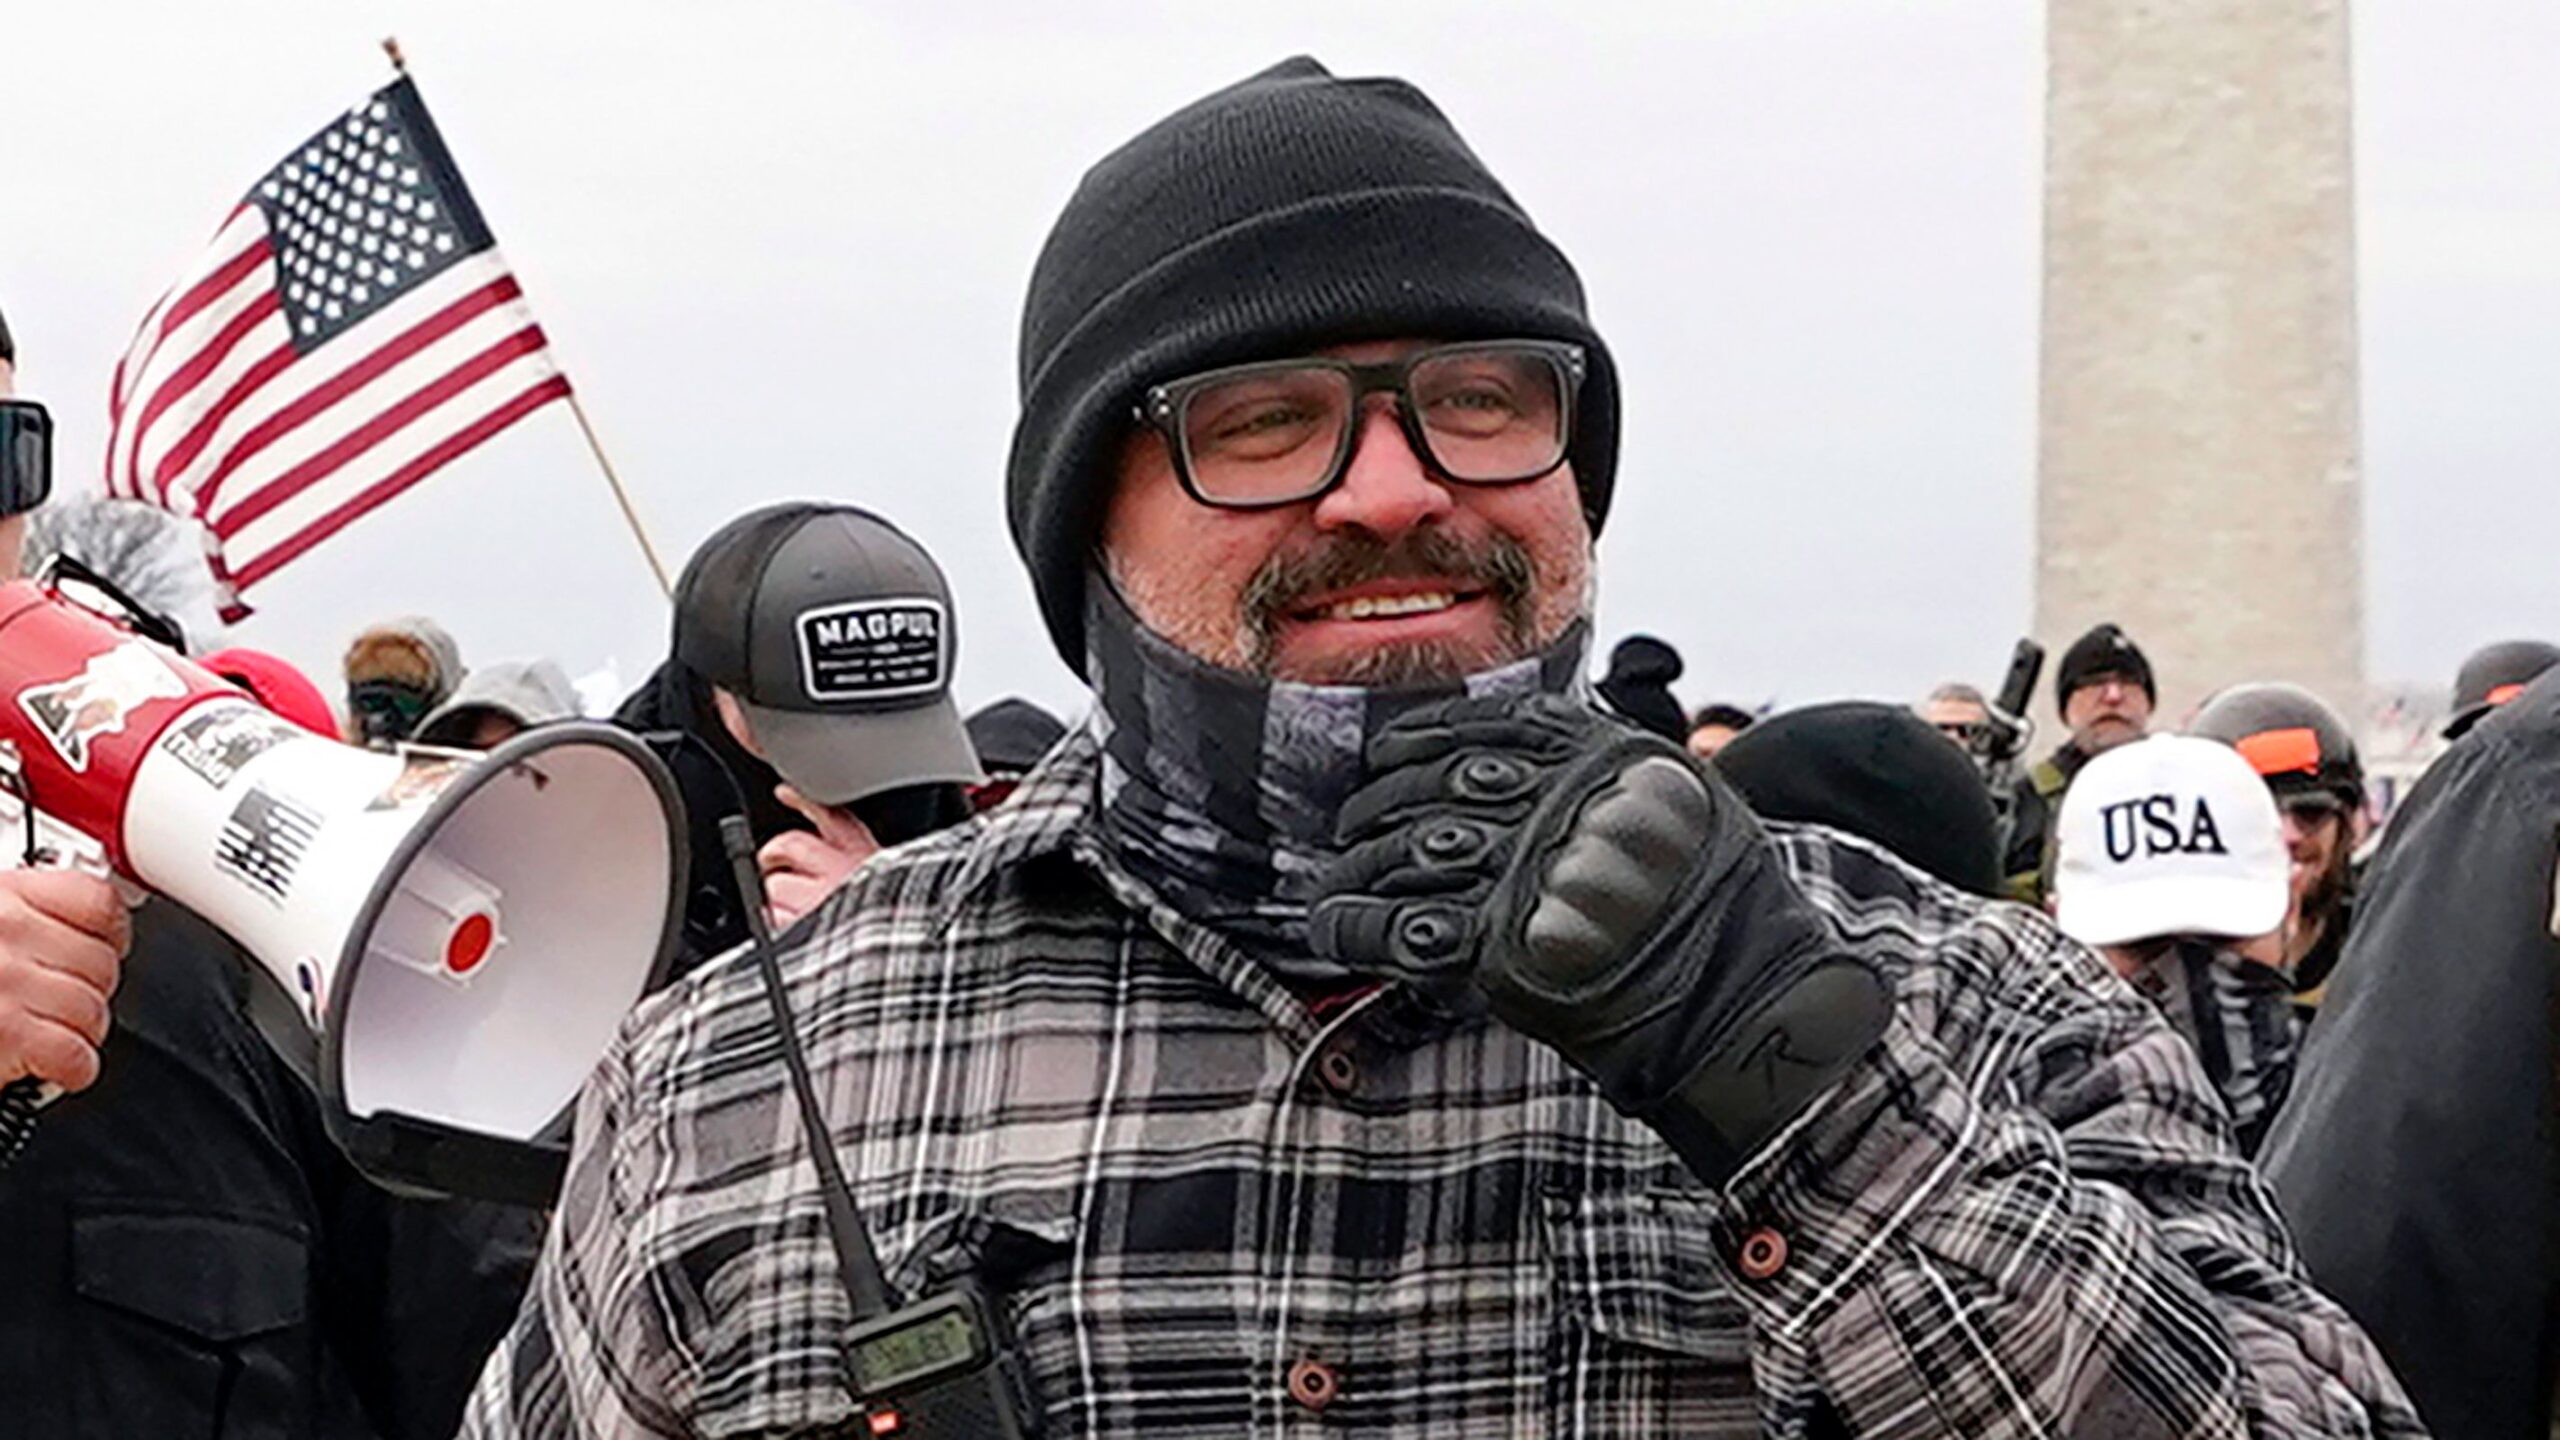 Joe Biggs, a leader of the Proud Boys who led the far-right organization’s infamous march to the ...